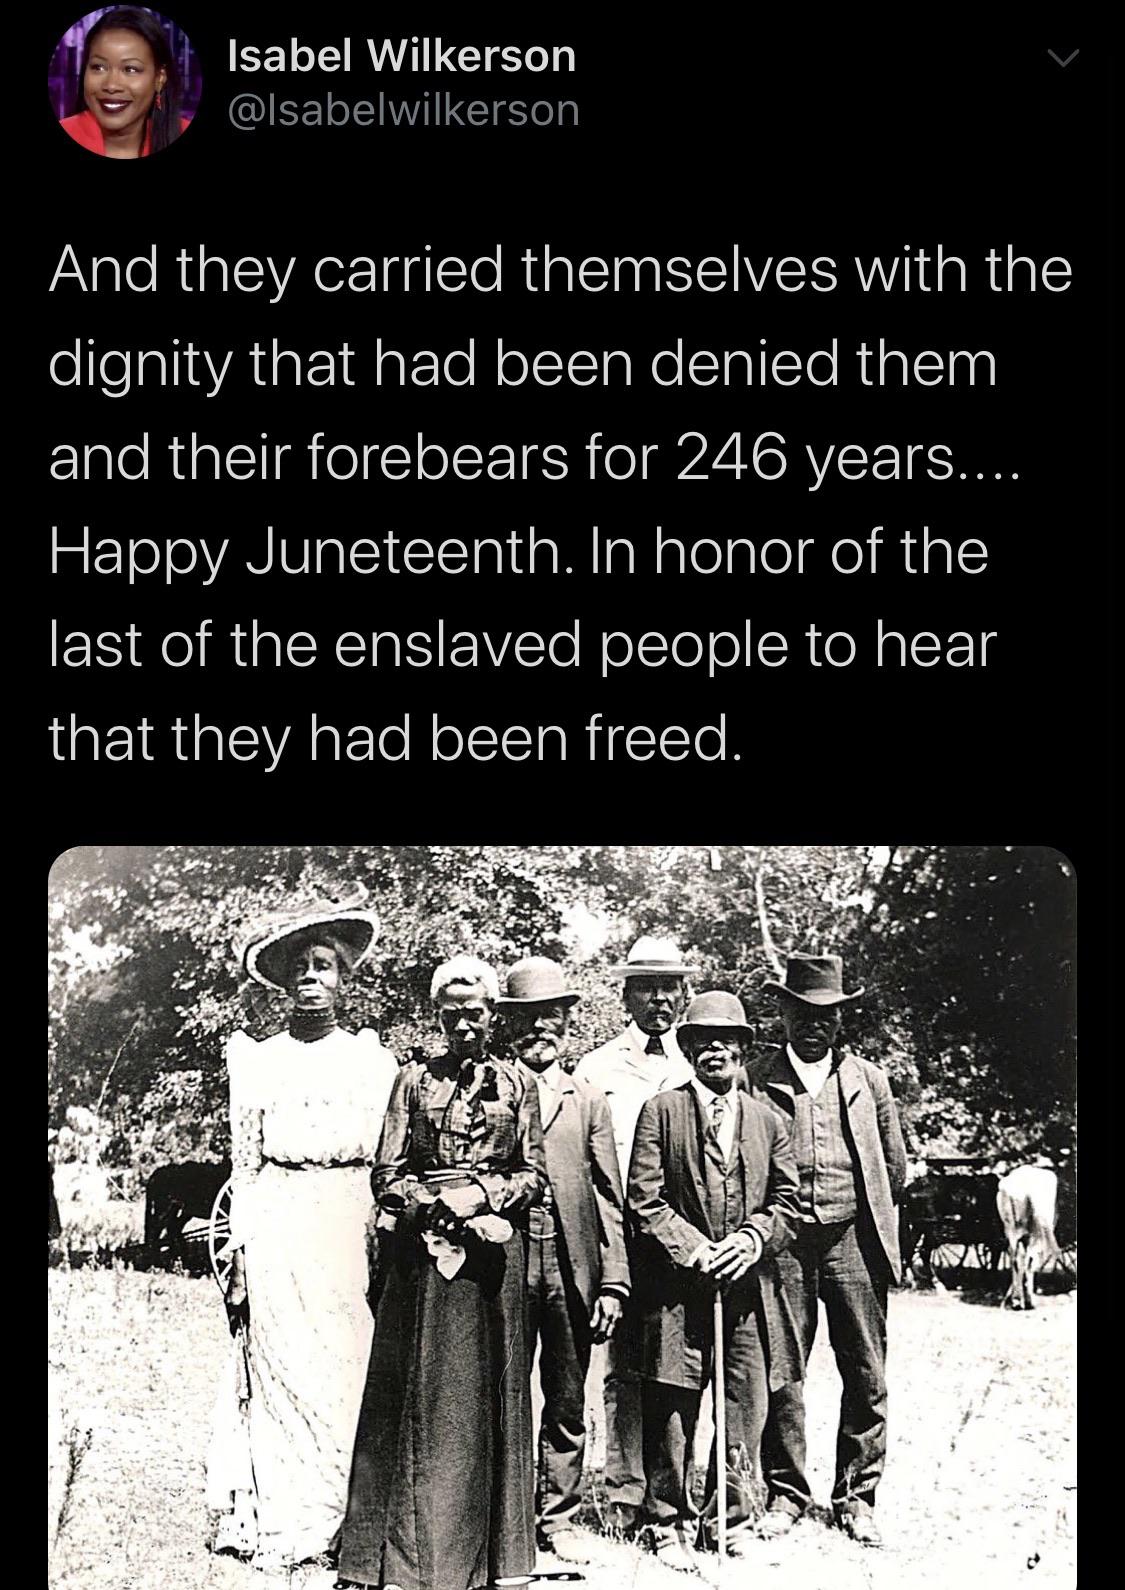 Tweets, African, Texas, Juneteenth, Fuck, Europe Black Twitter Memes Tweets, African, Texas, Juneteenth, Fuck, Europe text: Isabel Wilkerson @lsabelwilkerson And they carried themselves with the dignity that had been denied them and their forebears for 246 years Happy Juneteenth. In honor of the last of the enslaved people to hear that they had been freed. 